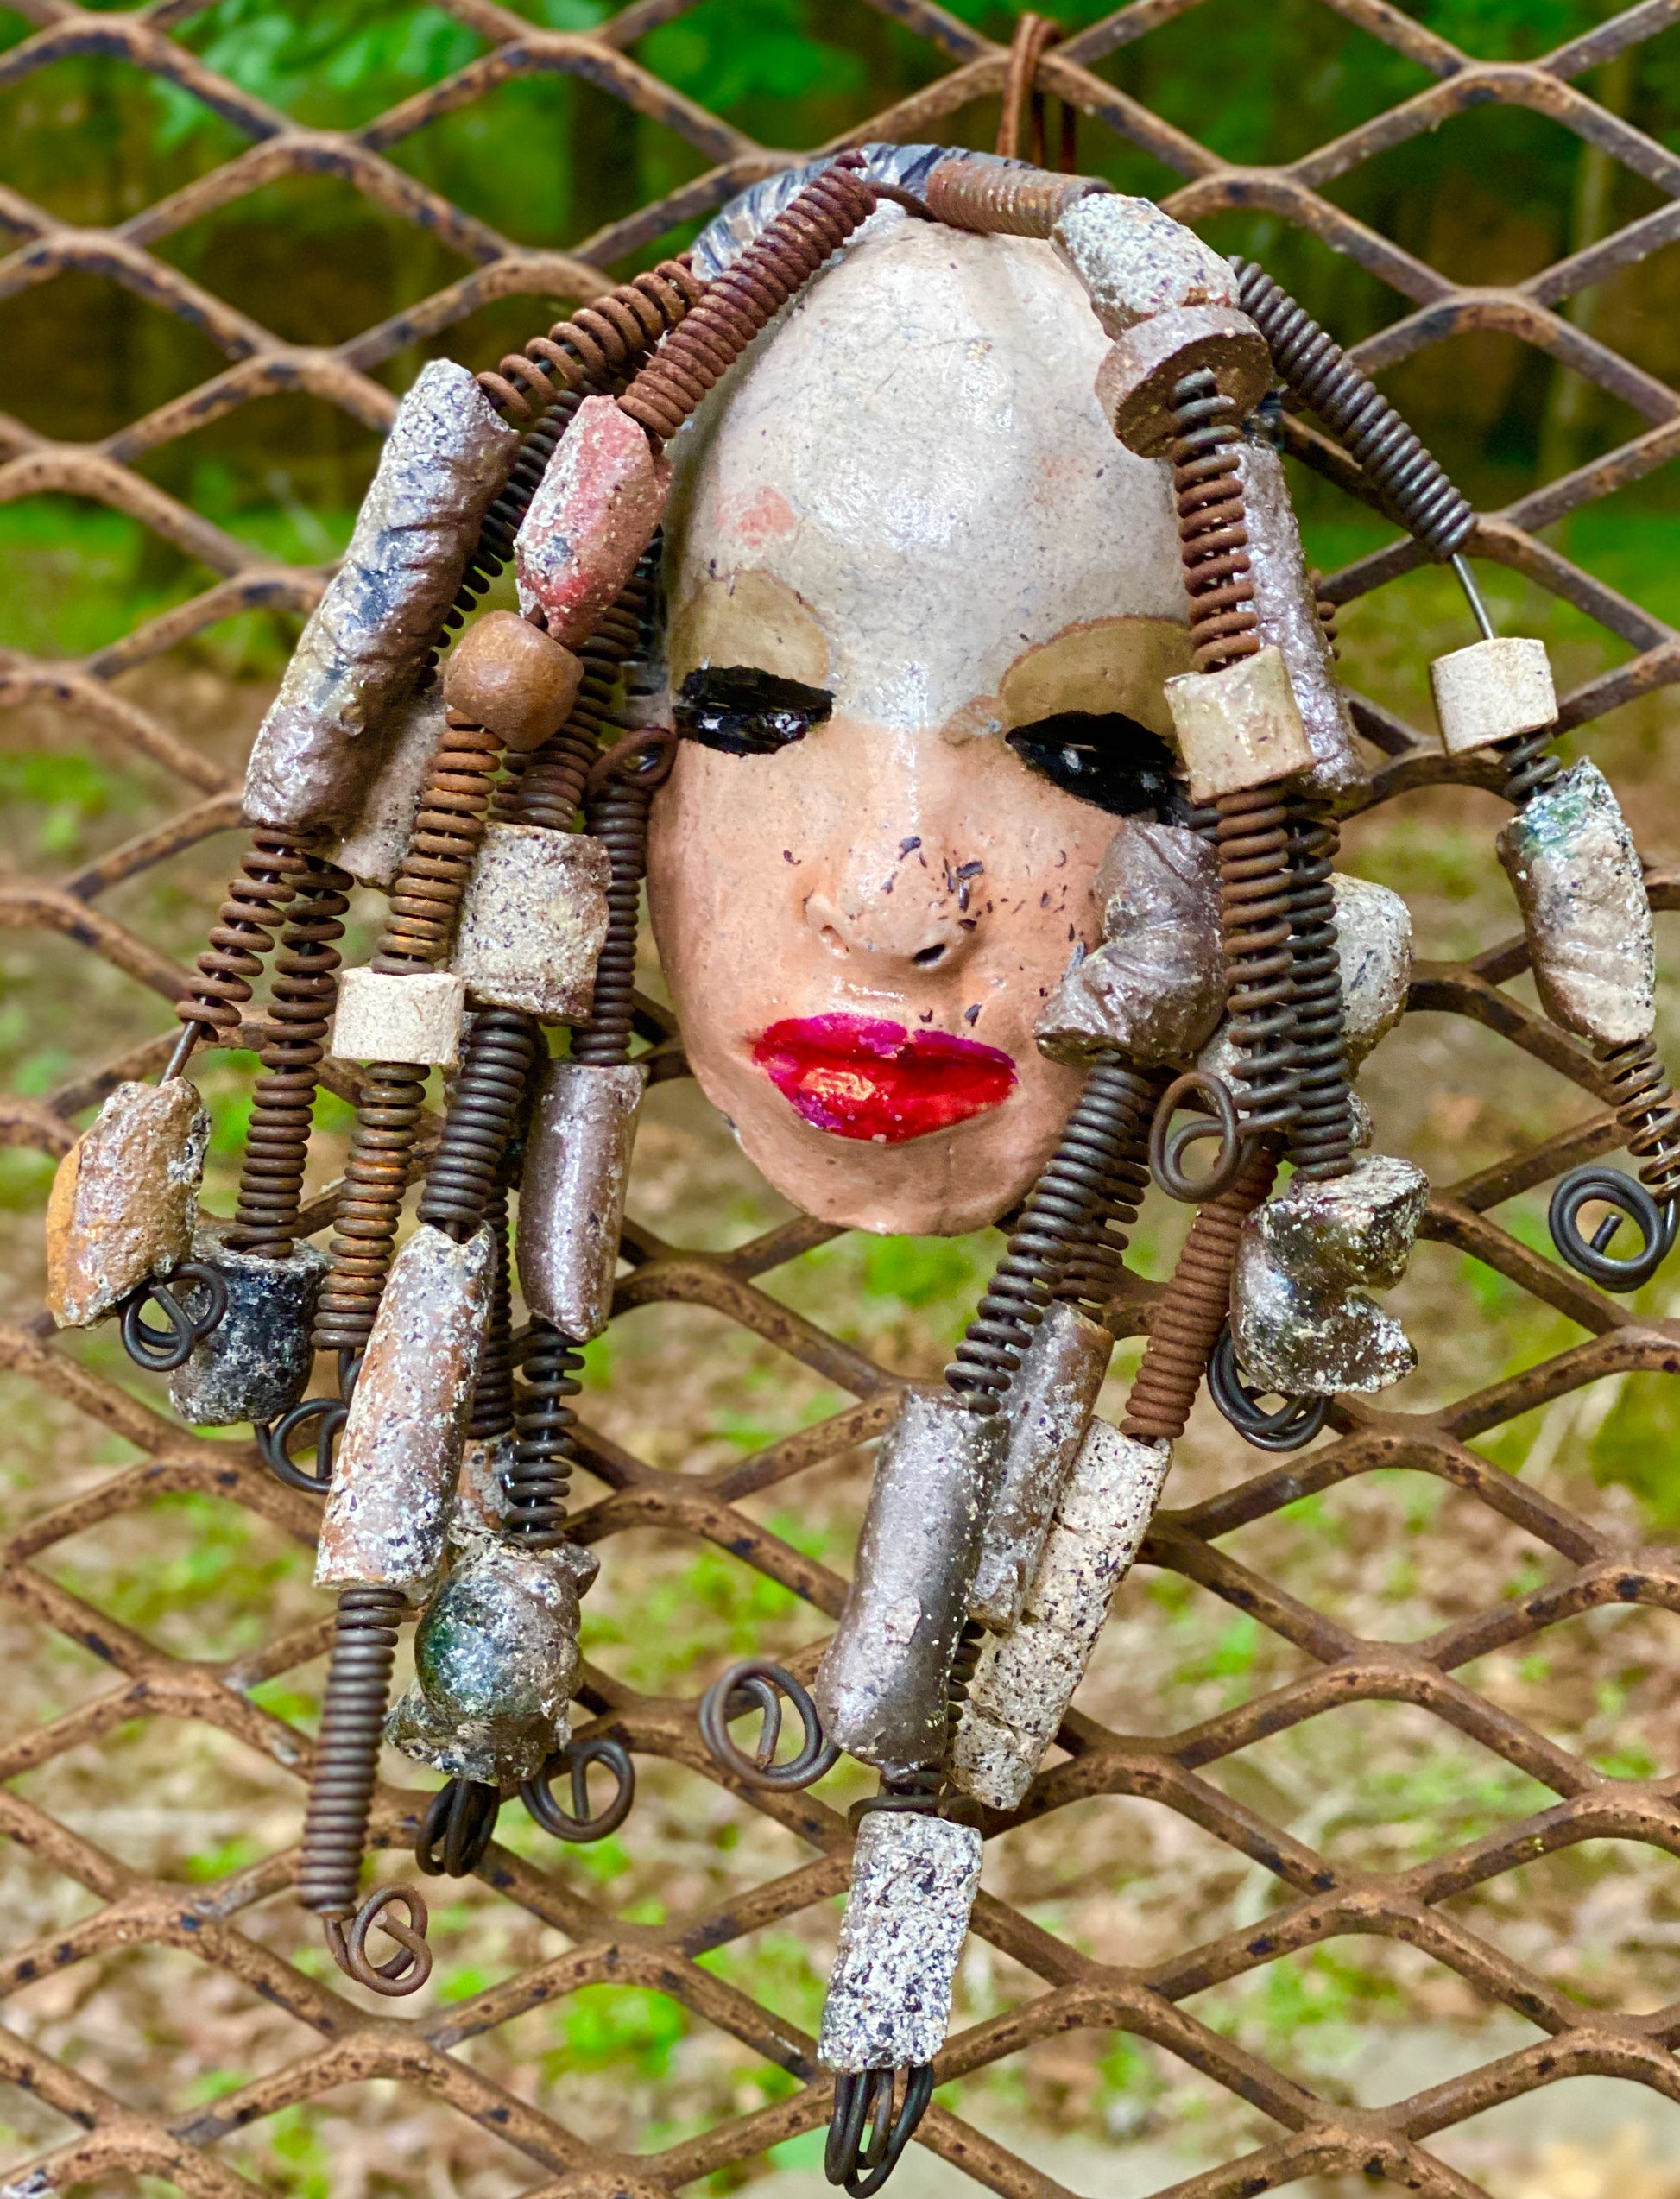 I started making art soon after seeing authentic African artwork at the Smithsonian Museum of African Art. I was in total awe. Ireland was inspired by my visit there.  Ireland weighs 13 ozs. Her face is formed with hand coiled wire and raku beads Ireland's  face  is two tone and beams with pale pink crackle glaze and ruby red lips.